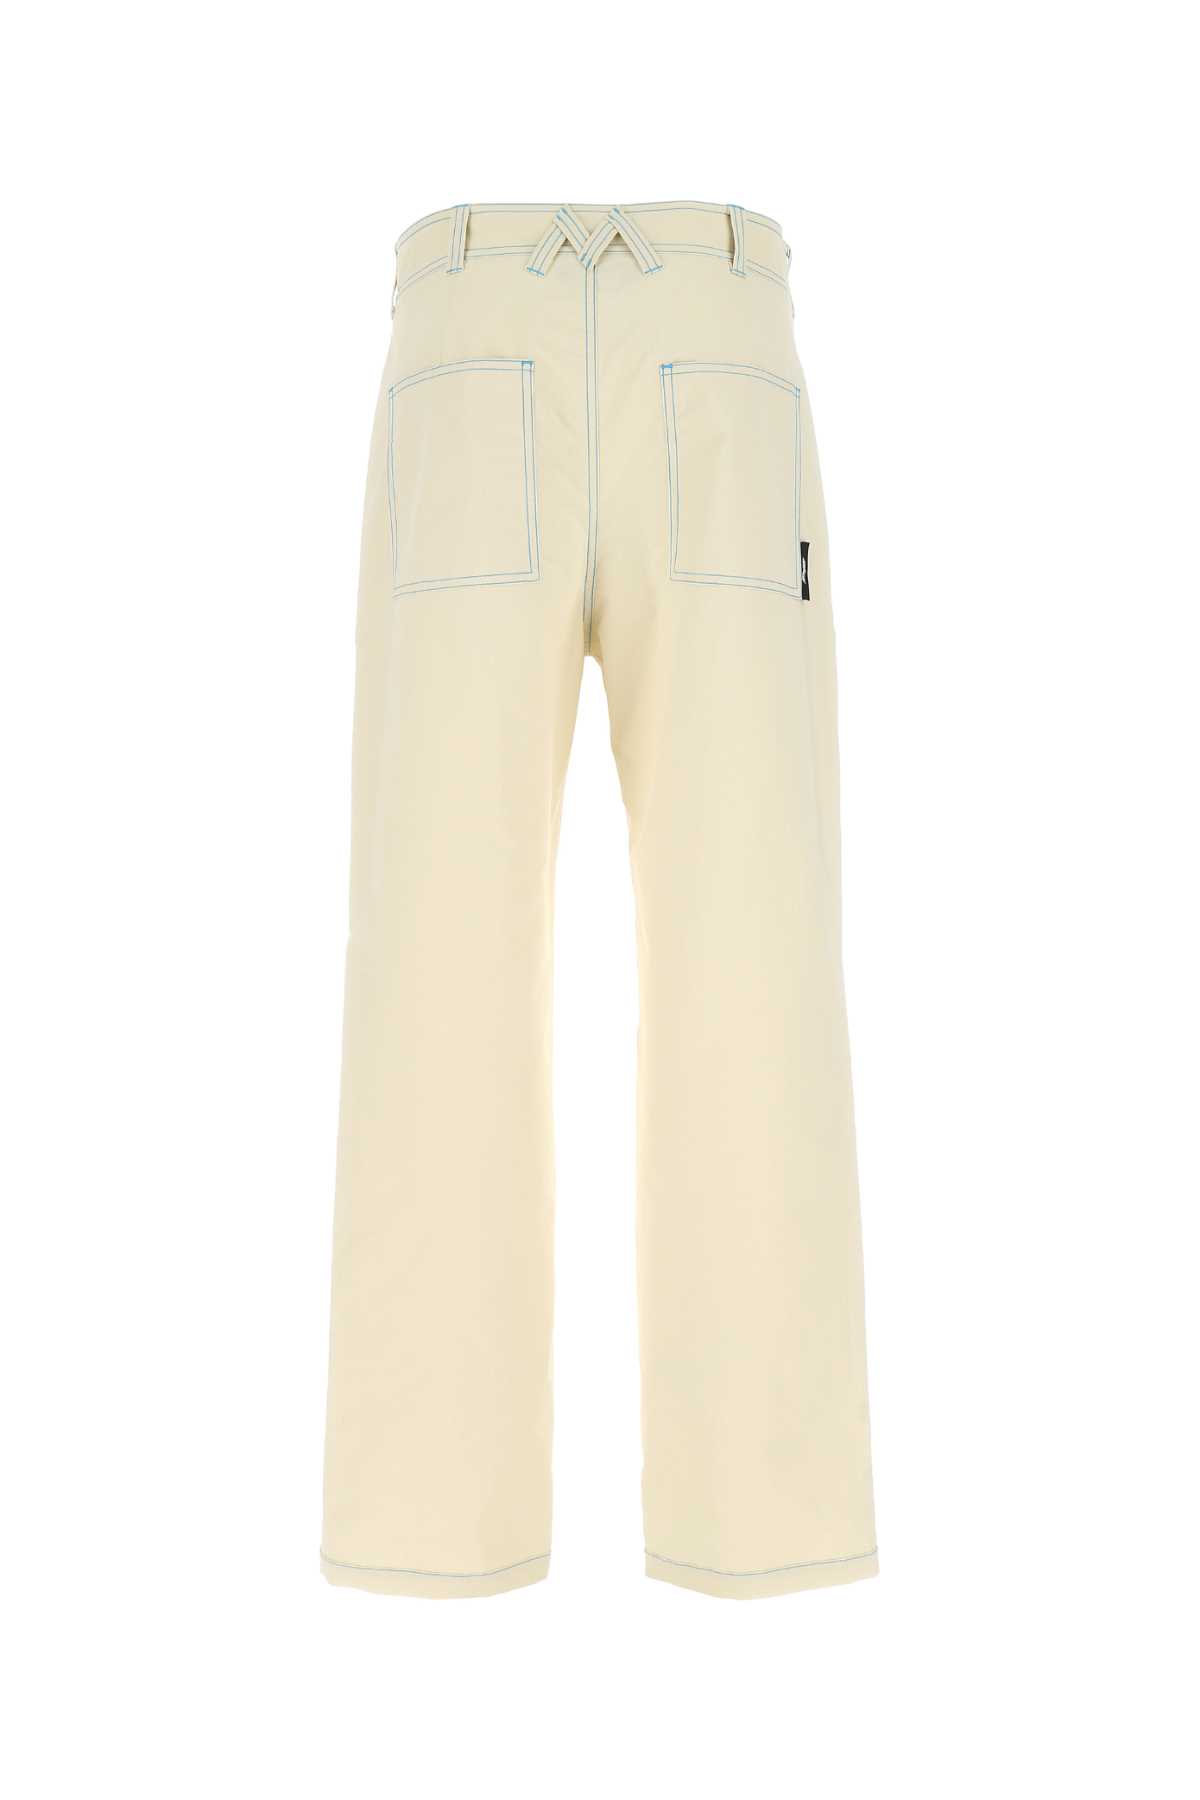 Msgm Ivory Polyester Cargo Pant In 02